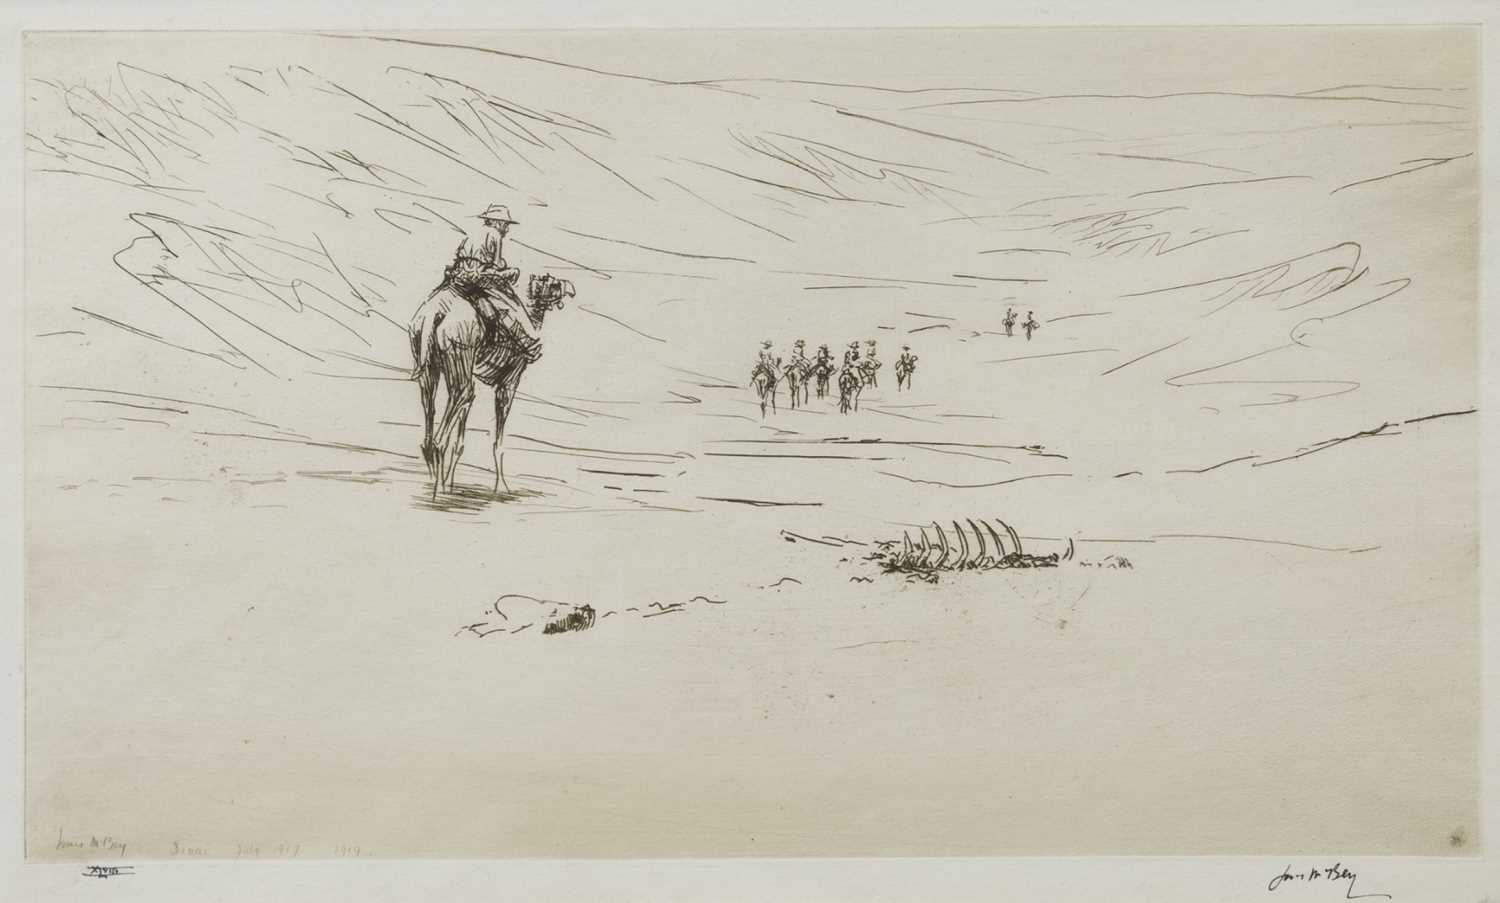 Lot 125 - THE DESERT OF SINAI (NO. 2), AN ETCHING BY JAMES MCBEY